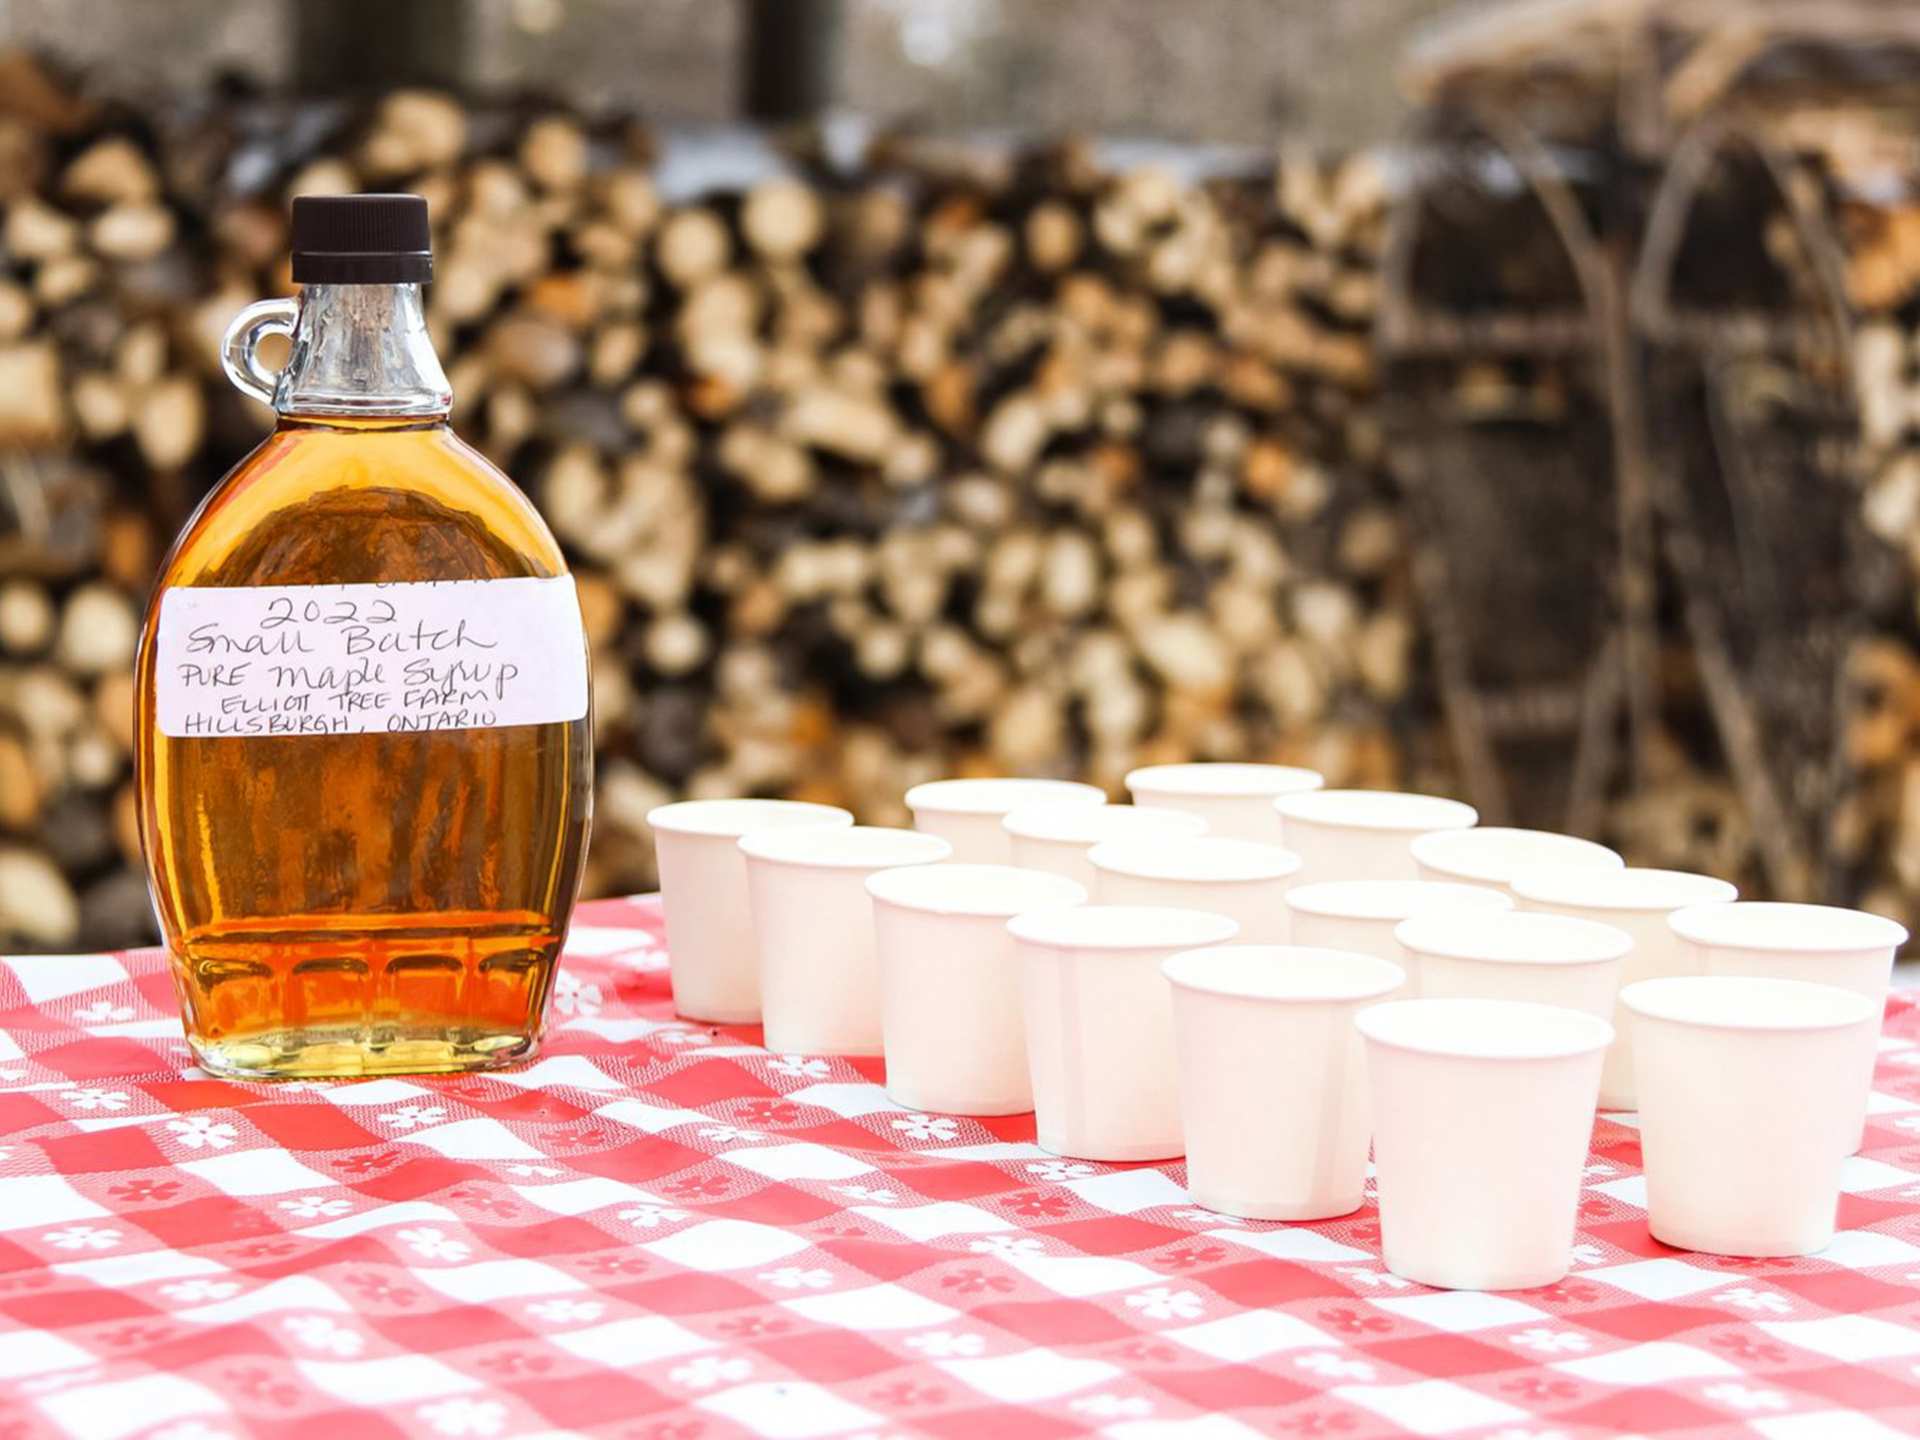 Rural Route Tour Co. maple syrup farm tour | A bottle of Elliott Tree Farm maple syrup with sample cups on a table